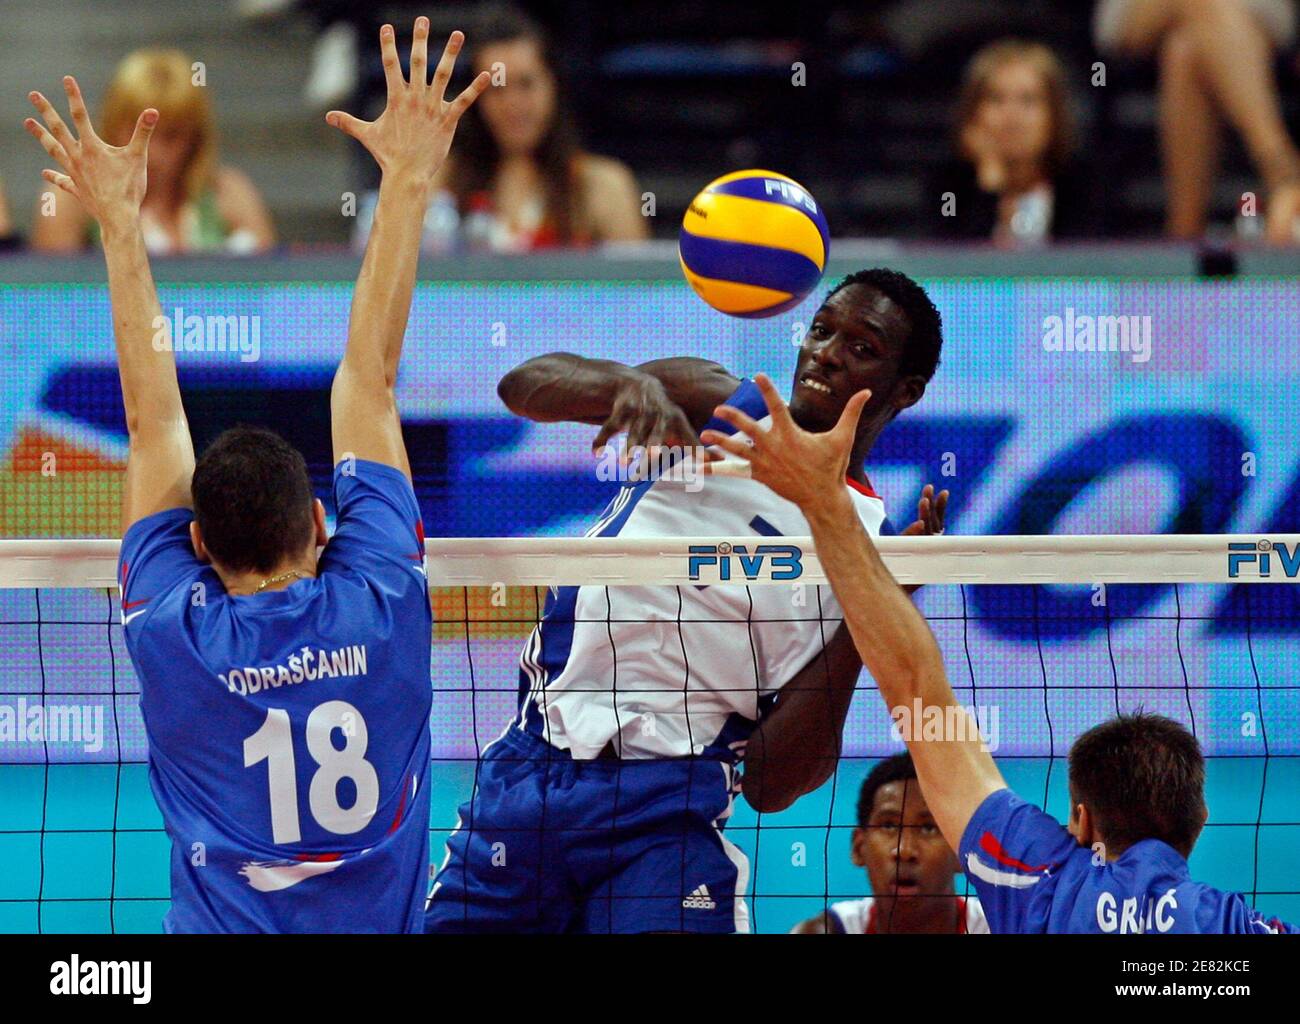 Cuba's Durruty Osmany Camejo (C) spikes the ball against Serbia's Marko Podrascanin (L) and Nikola Grbic during their men's World League 2009 final round volleyball match in Belgrade July 25, 2009.  REUTERS/Ivan Milutinovic (SERBIA SPORT VOLLEYBALL) Stock Photo